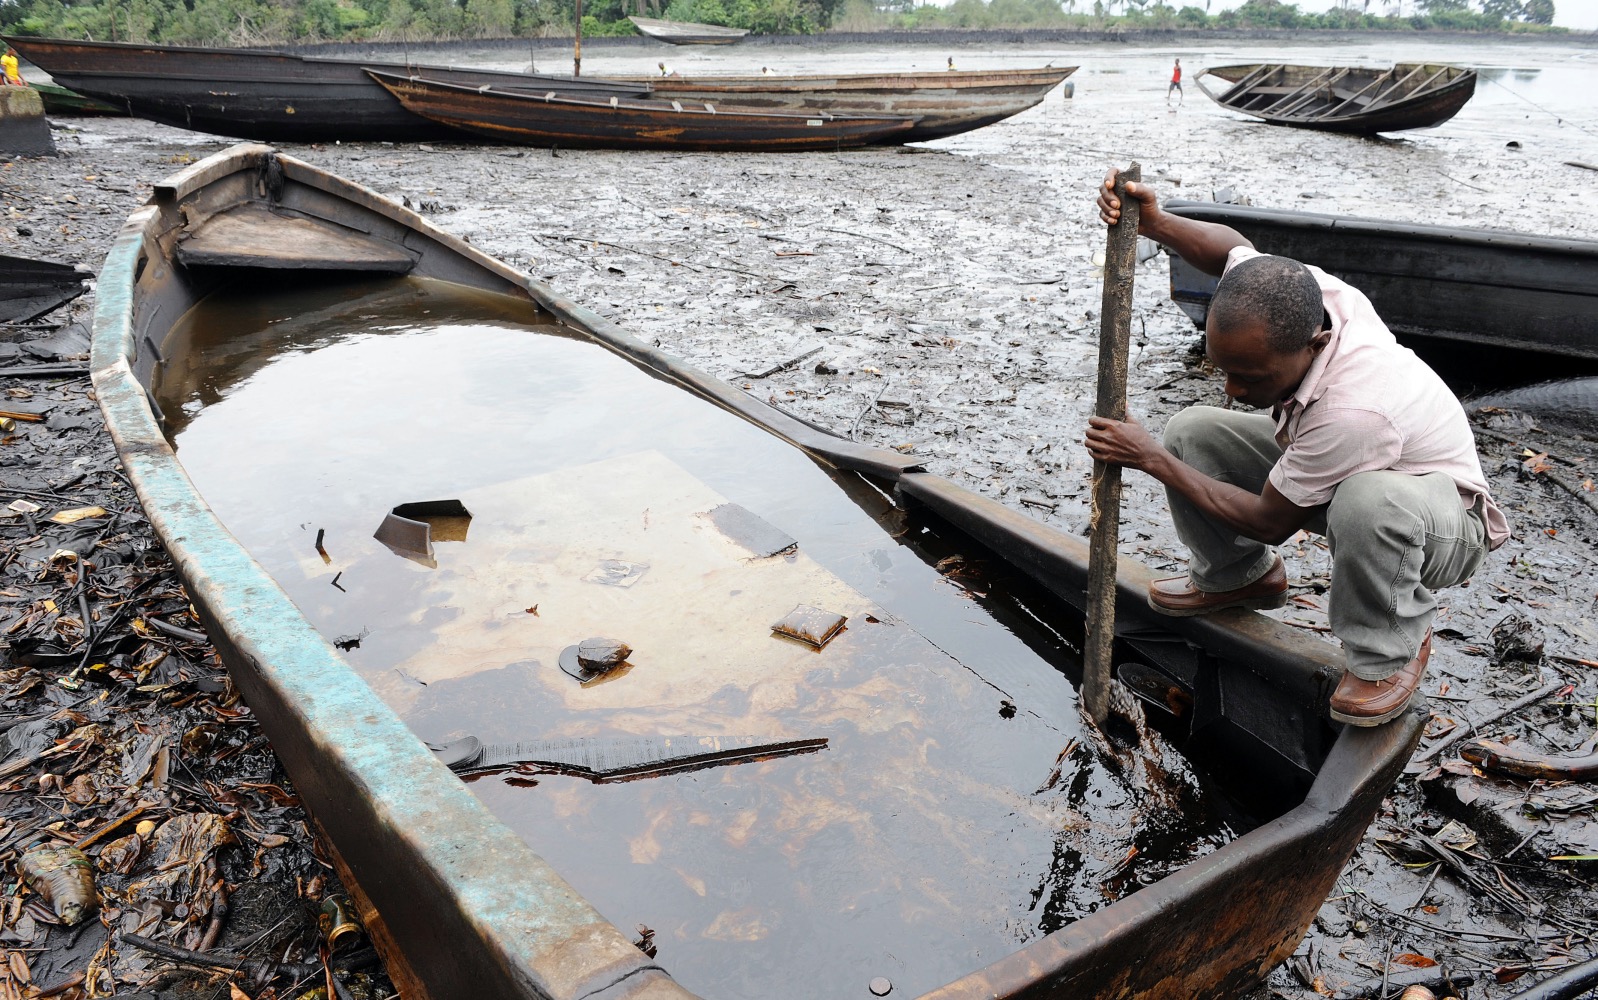 Niger Delta: An indigene of Bodo, Ogoniland region in Rivers State, tries to separate with a stick the crude oil from water in a boat at the Bodo waterways polluted by oil spills attributed to Shell equipment failure August 11, 2011 | AFP/Pius Ekpei